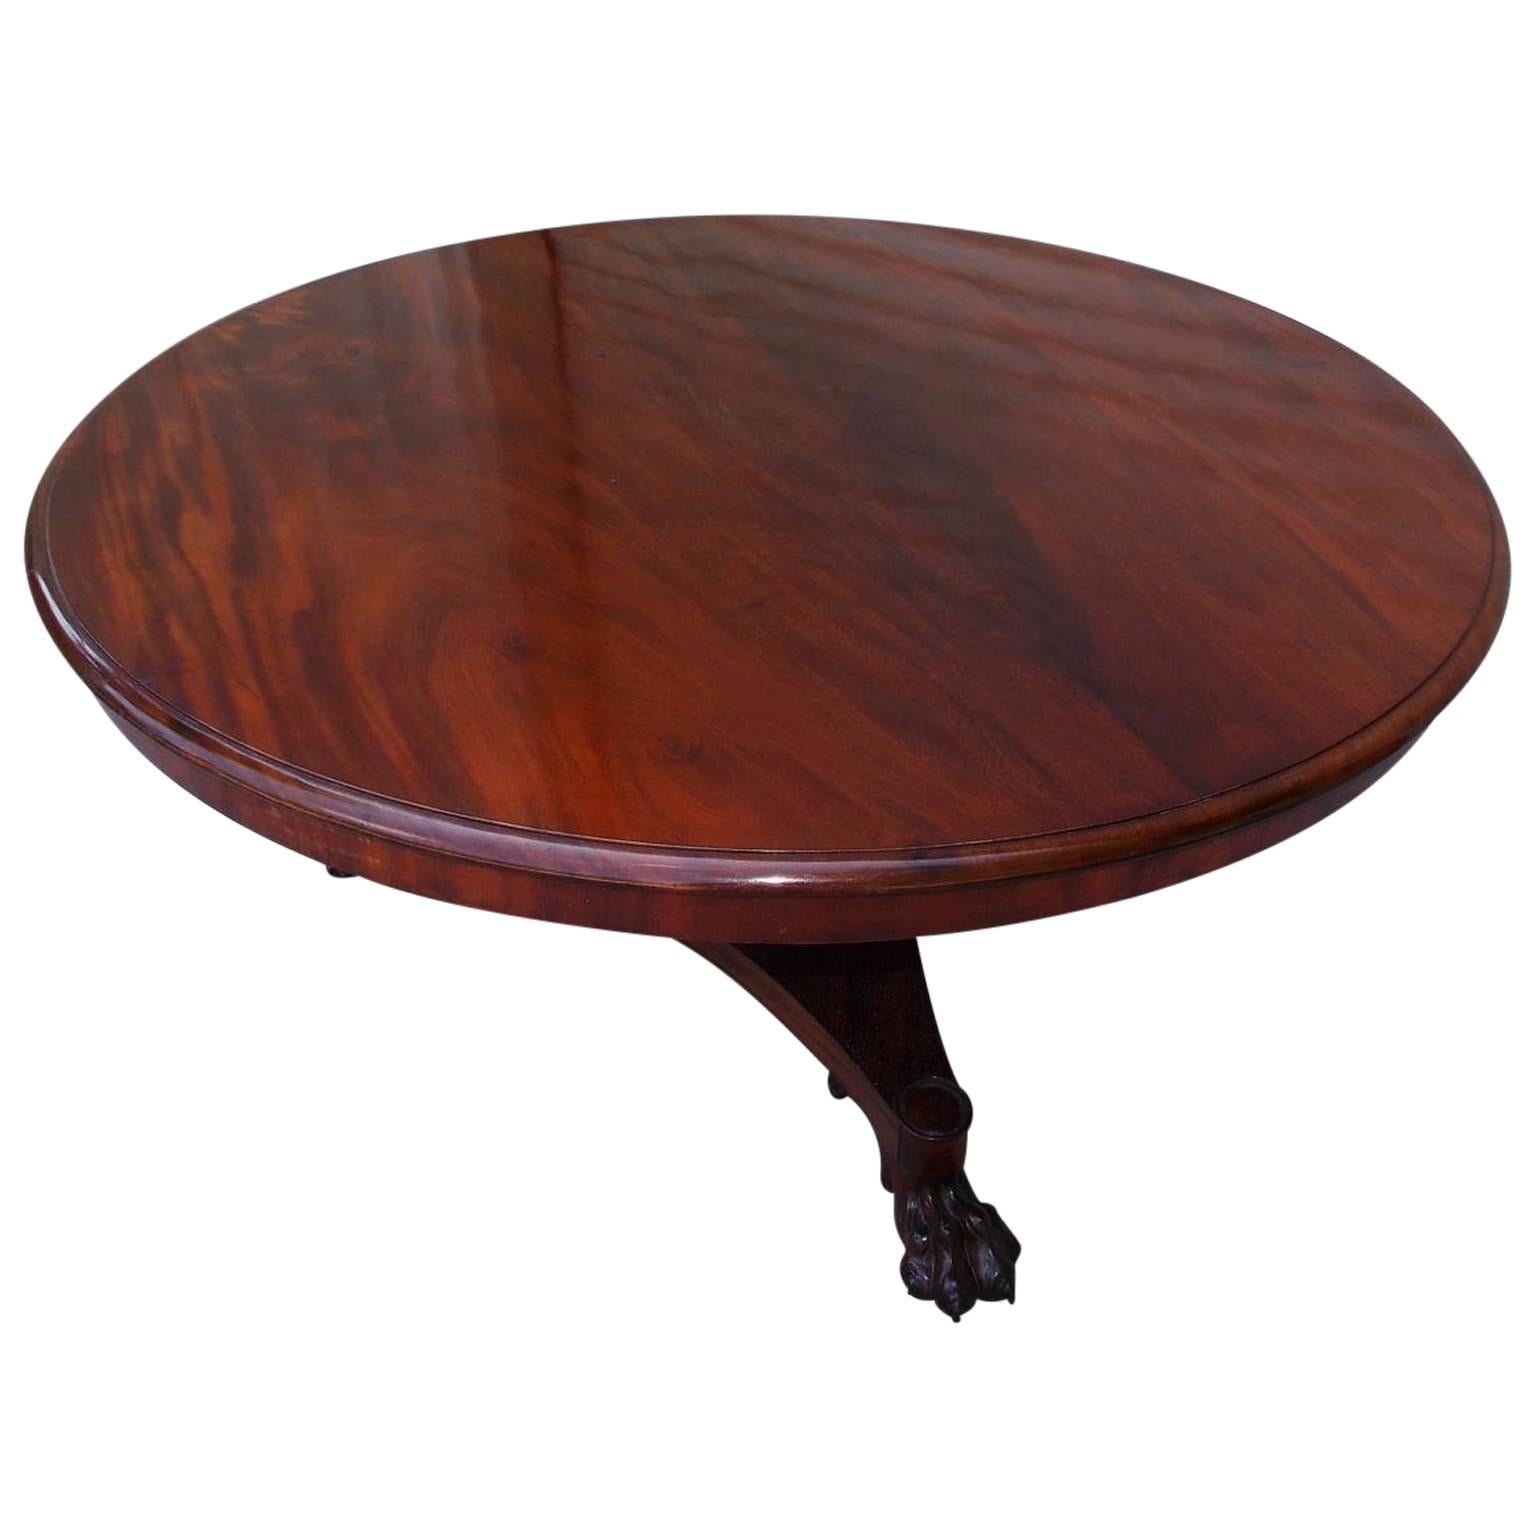 English Regency Mahogany Tilt-Top Center Table with Paw Feet, Circa 1815 For Sale